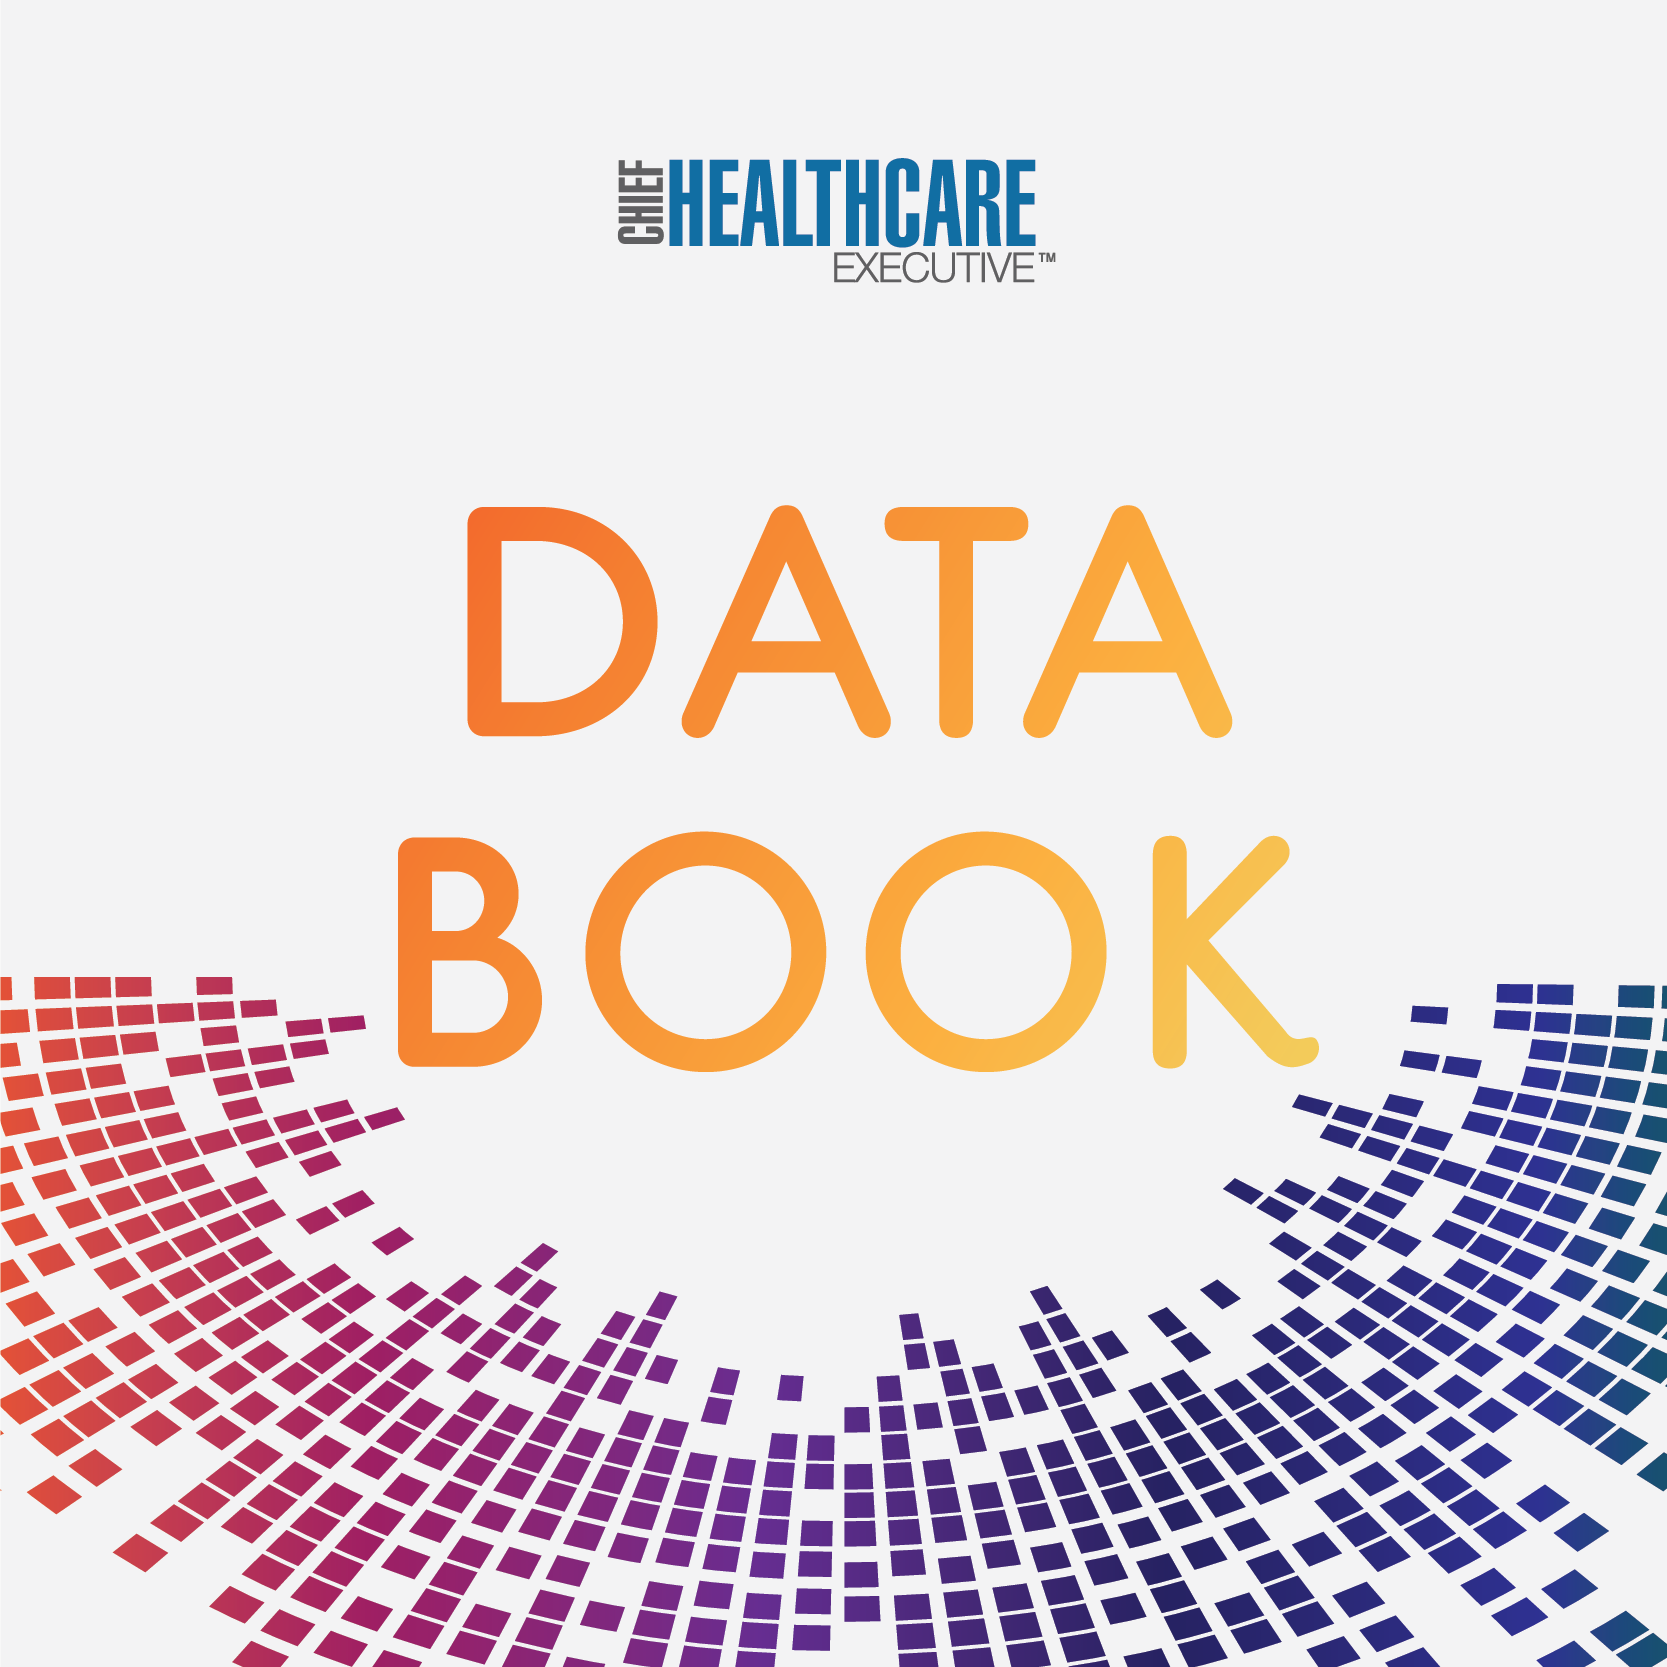 Podcast: Health Data and Innovations with Duane Schielke